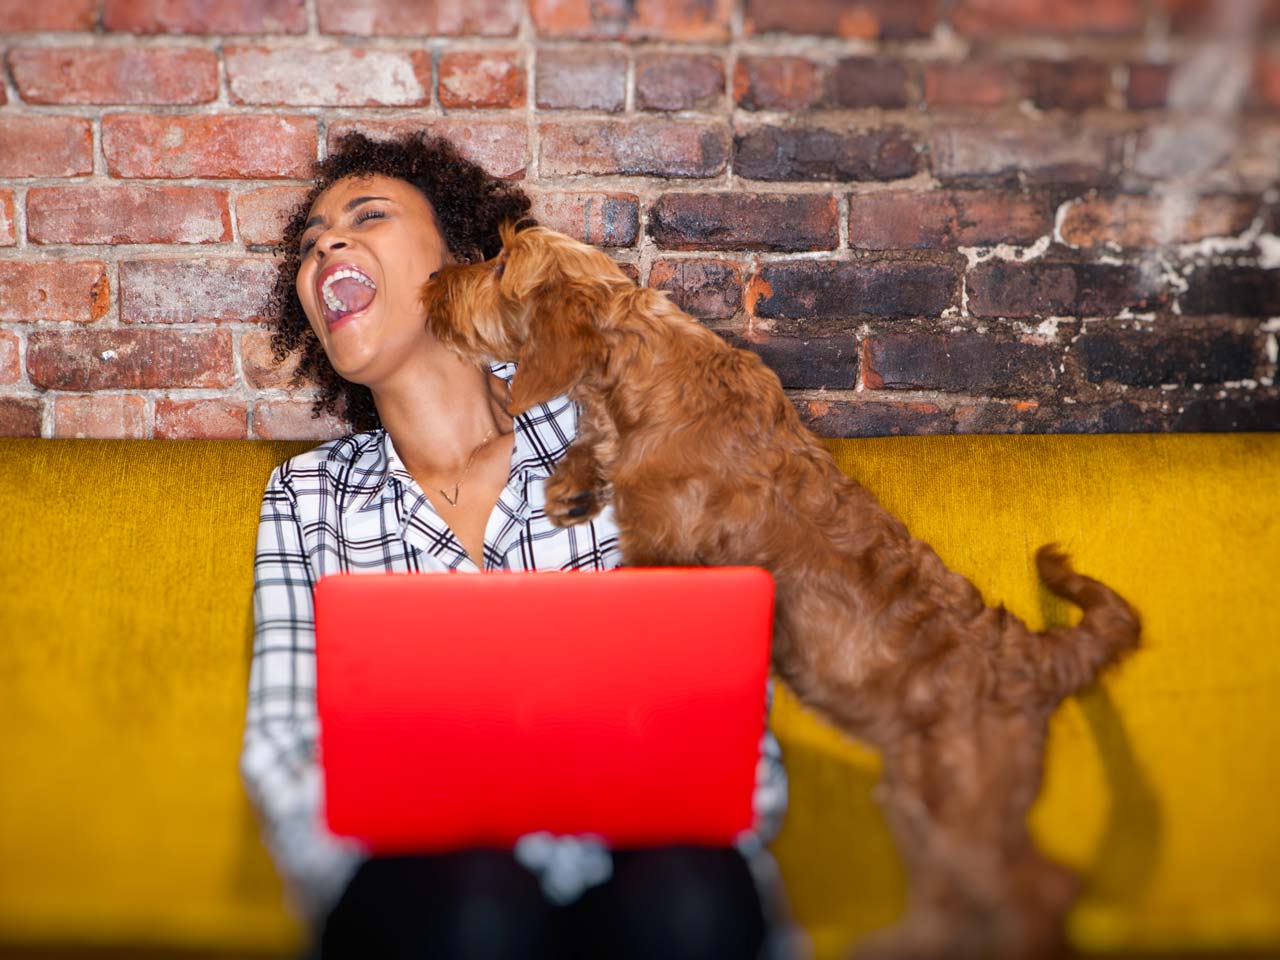 Woman on her laptop while pet dog licks her face